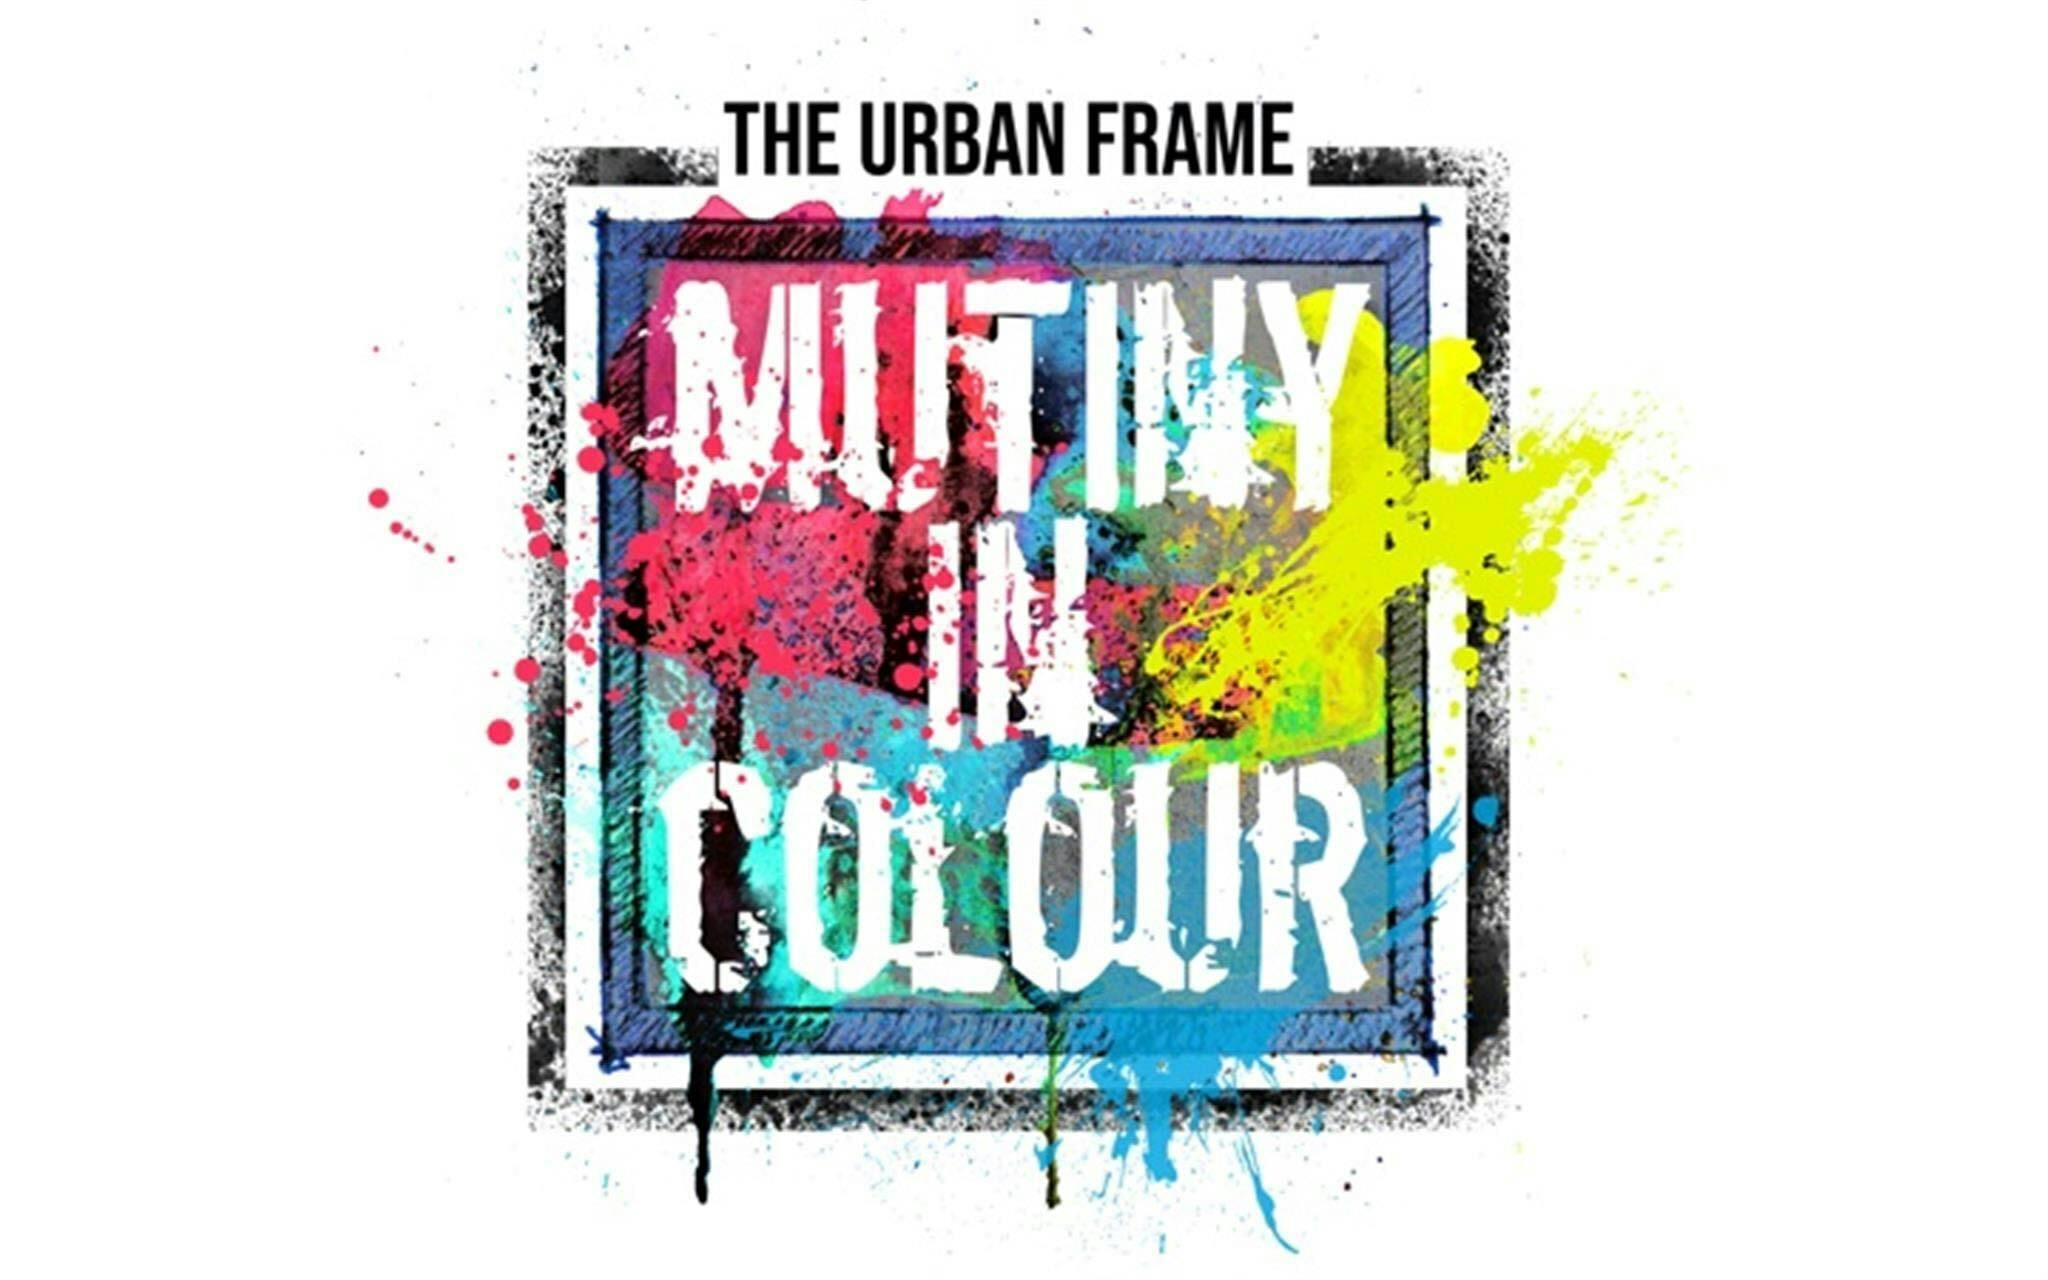 National Horse Racing Museum - The Urban Frame: Mutiny in Colour